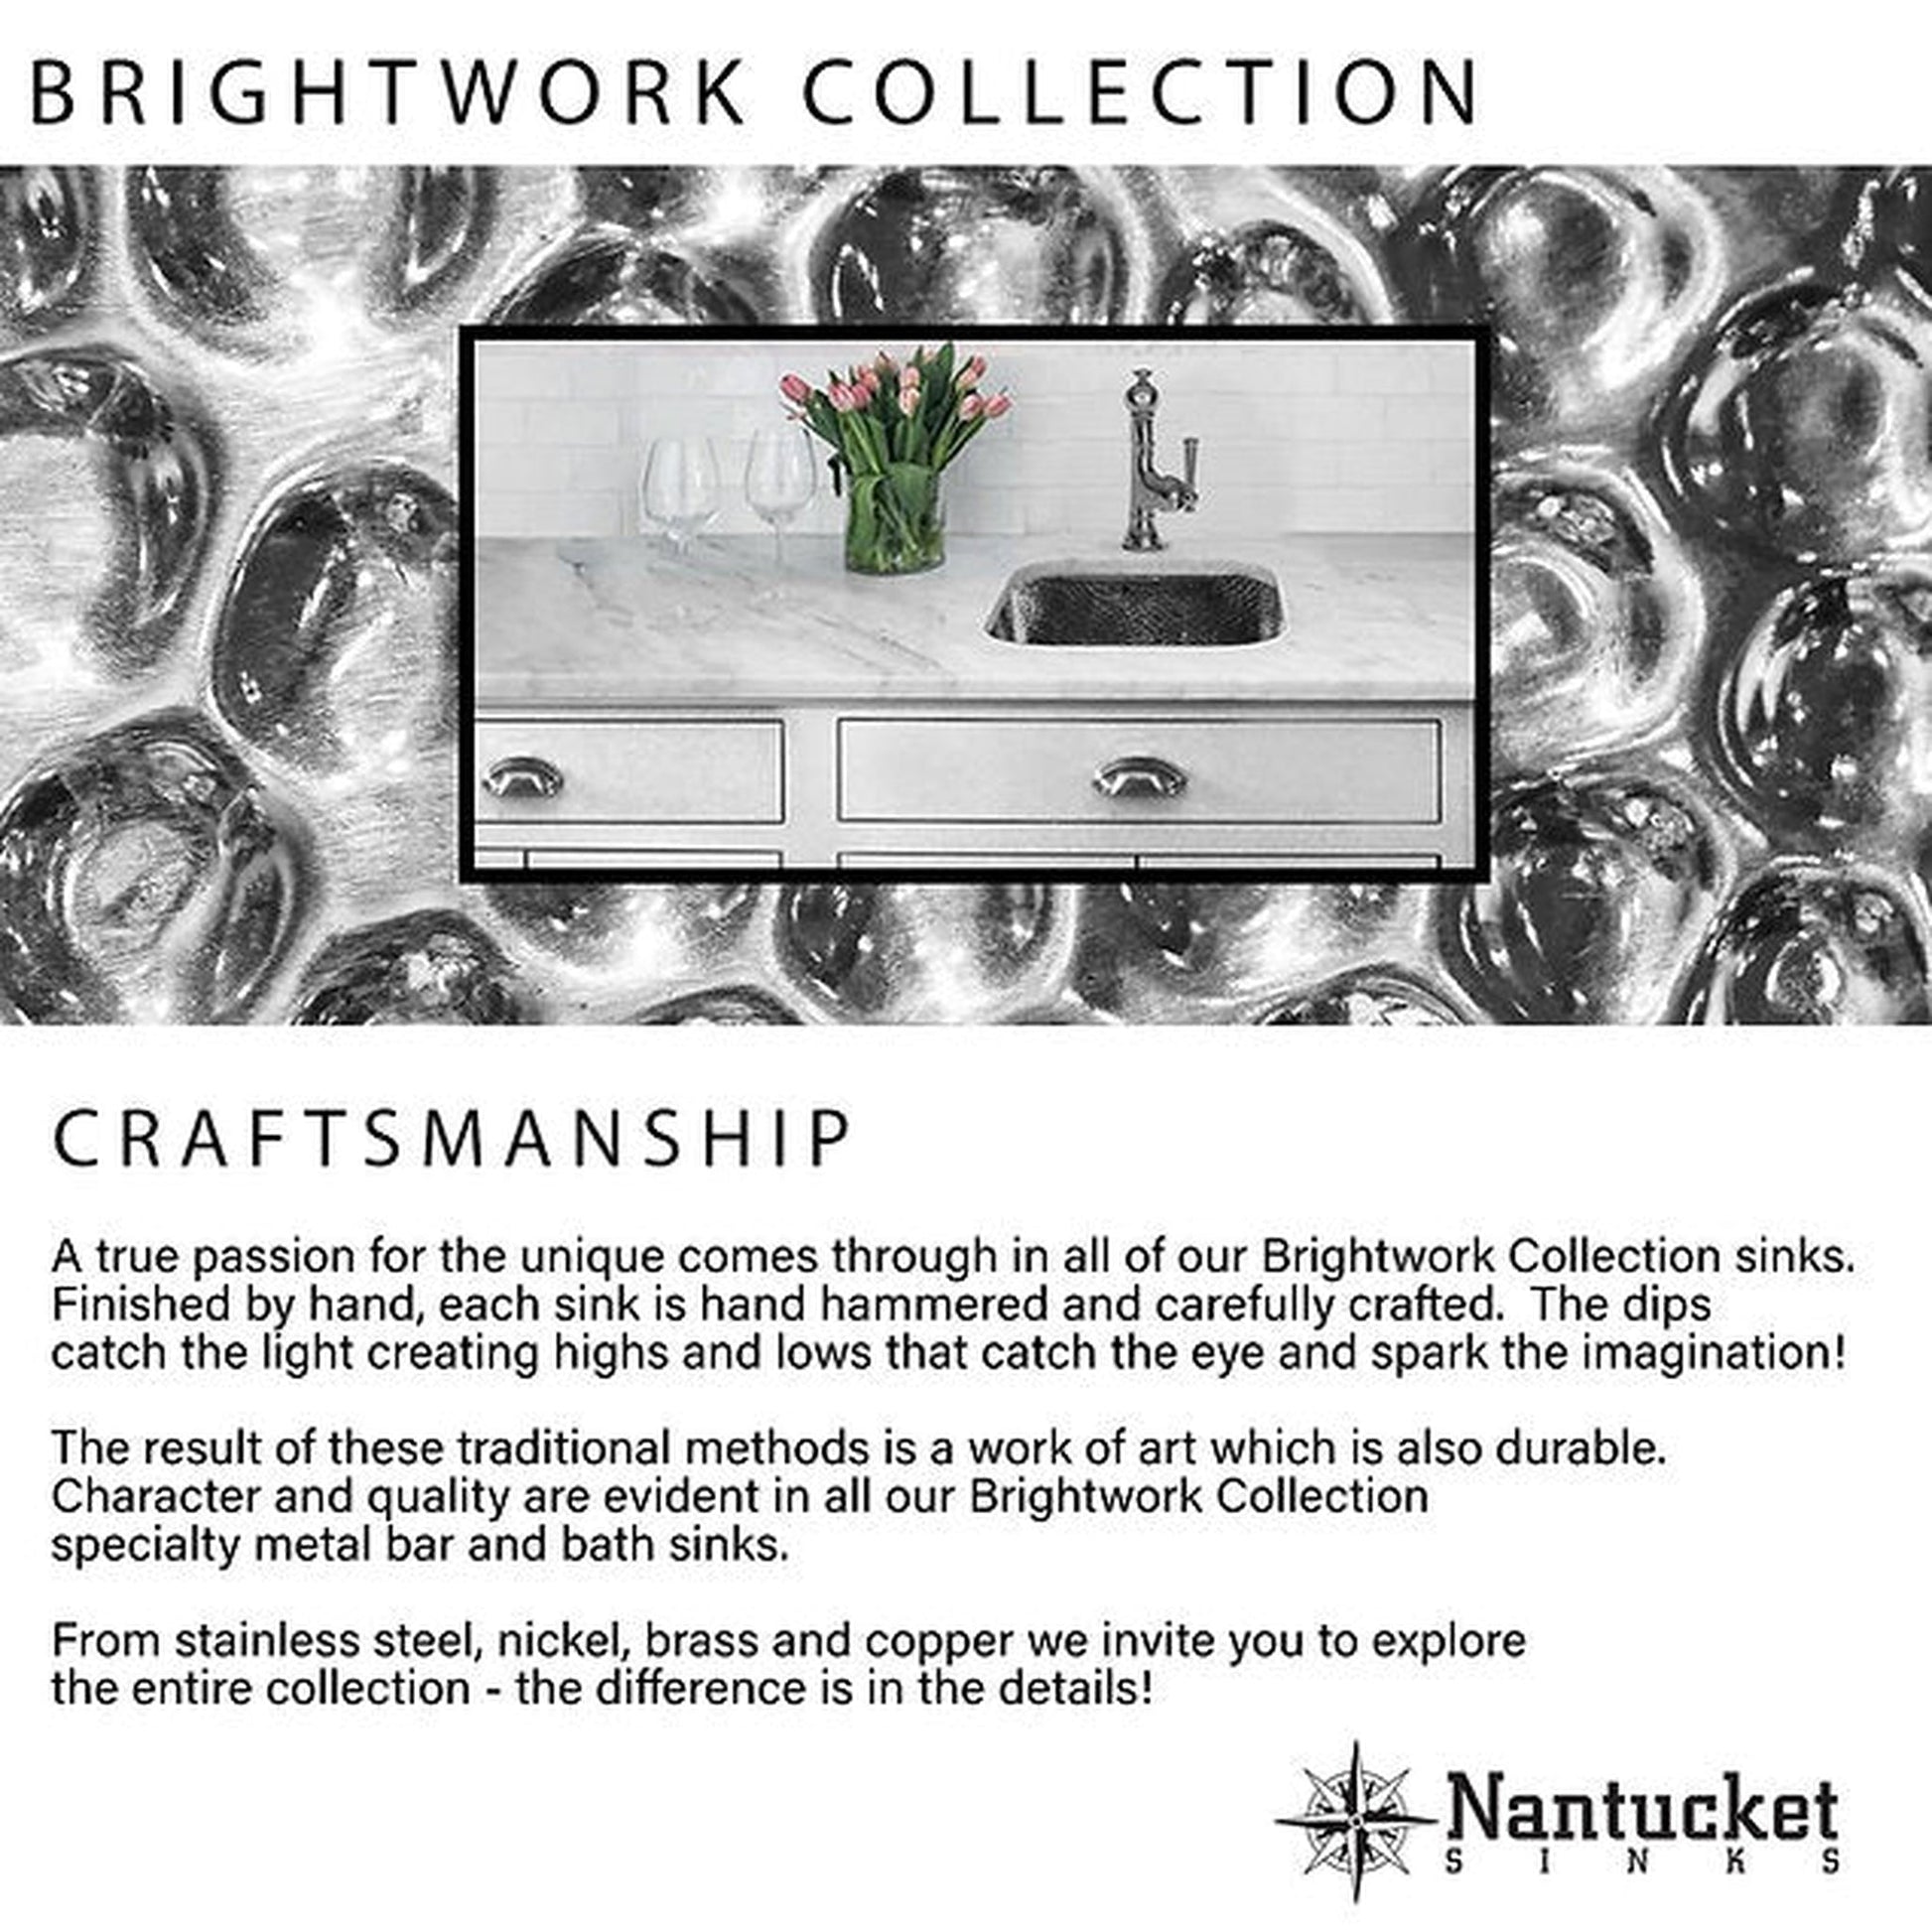 Nantucket Sinks Brightwork Home 20" W x 13" D" Rectangular Hand Hammered Polished Stainless Steel Dualmount Sink